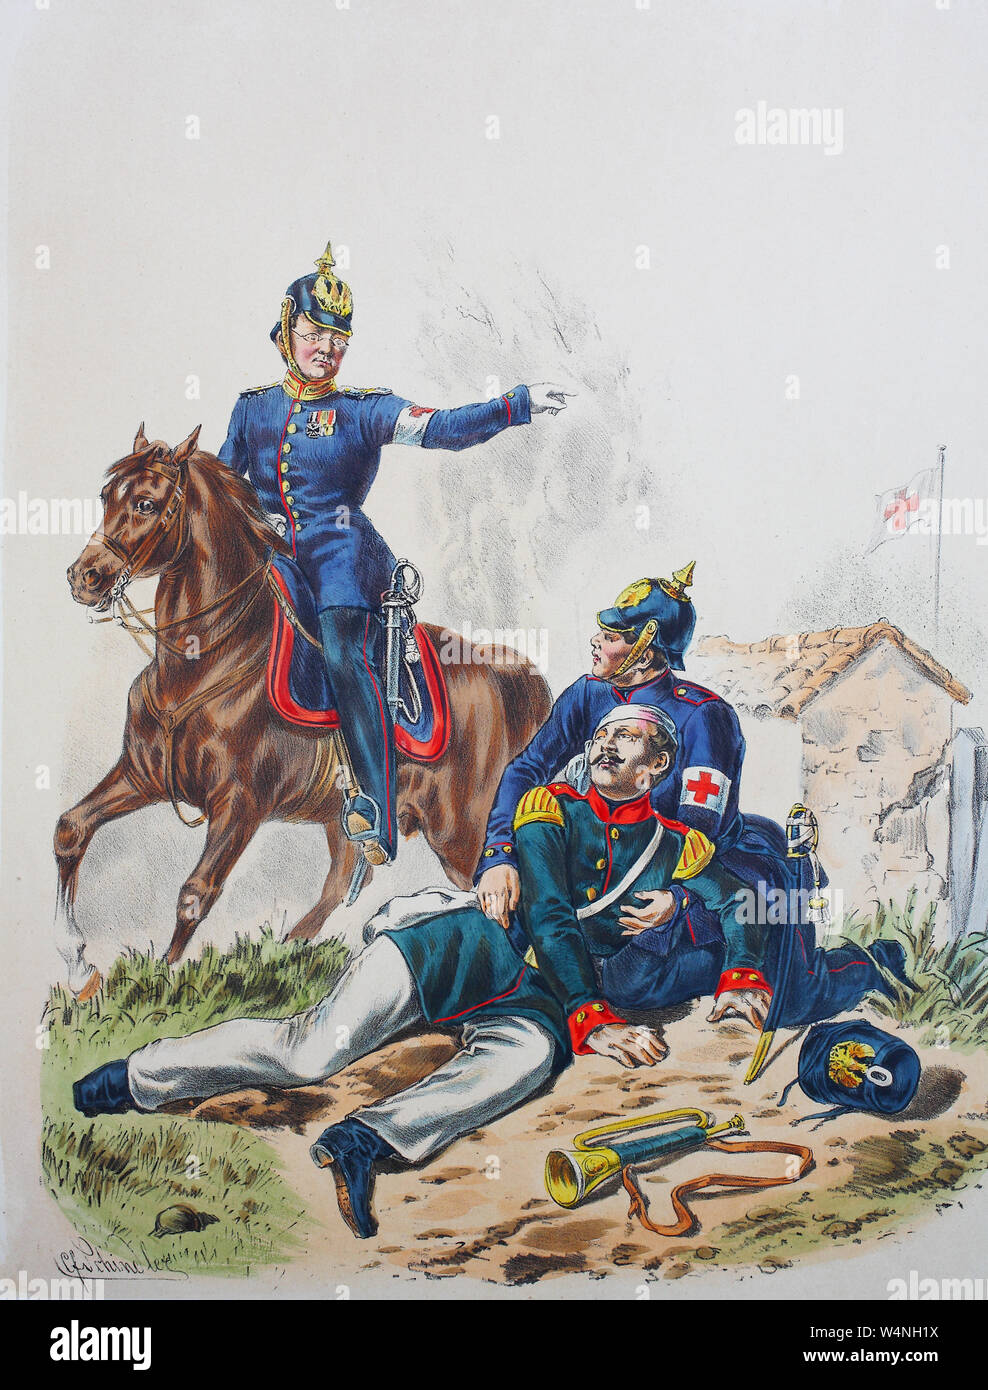 Royal Prussian Army, Guards Corps, Preußens Heer, preussische Garde, Sanitäter, Bataillons Arzt, Lazarettgehilfe, Digital improved reproduction of an illustration from the 19th century Stock Photo